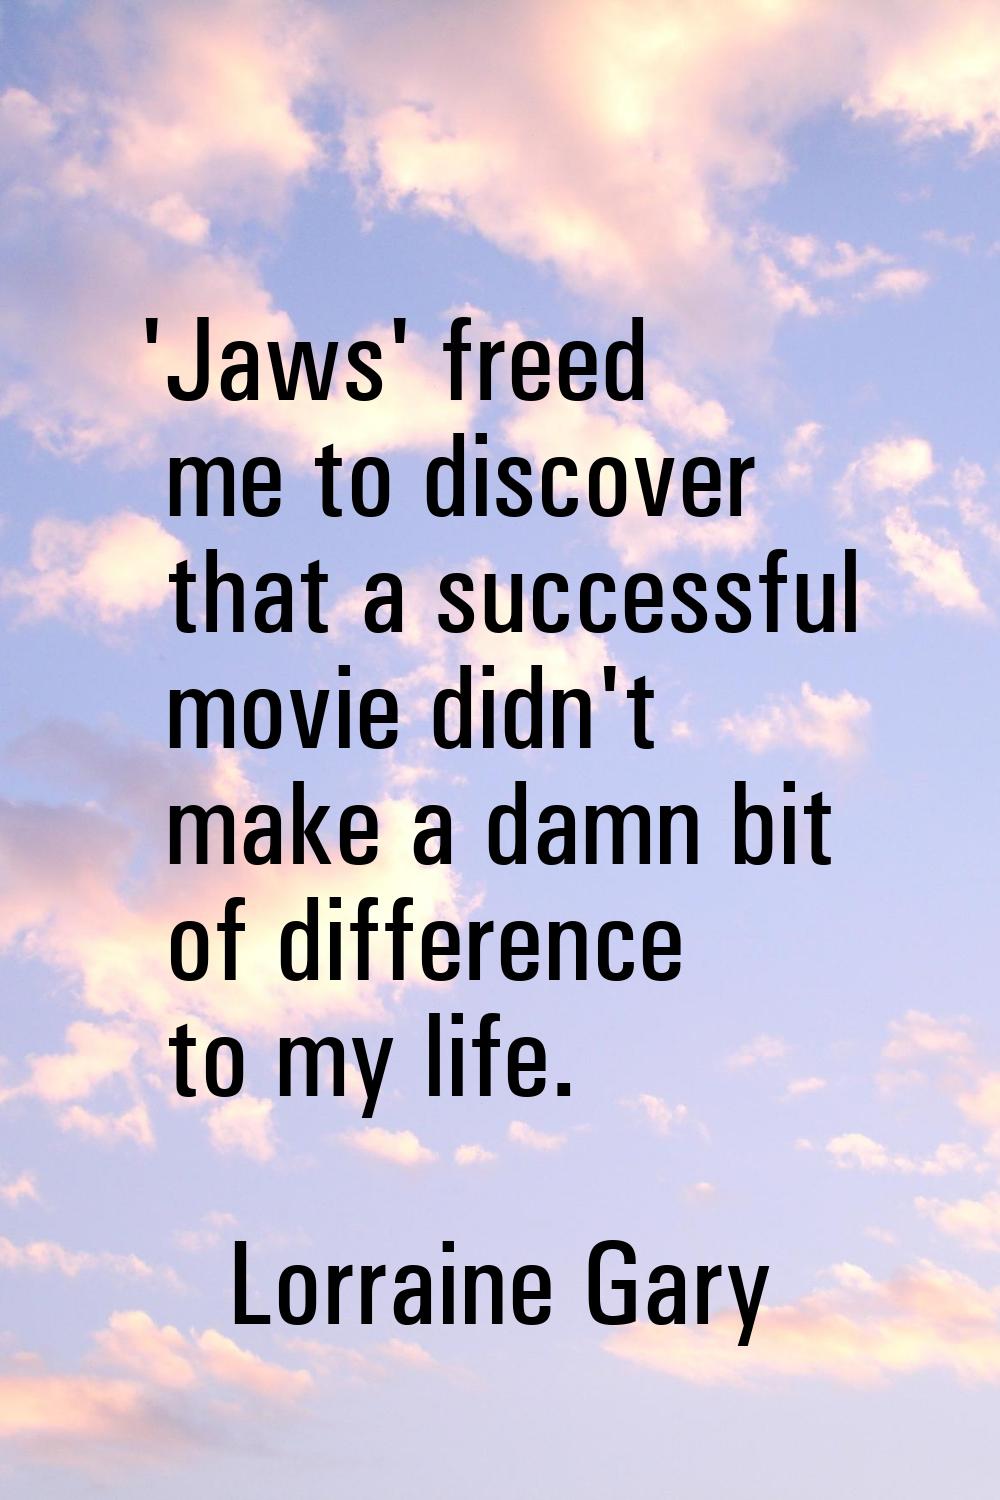 'Jaws' freed me to discover that a successful movie didn't make a damn bit of difference to my life